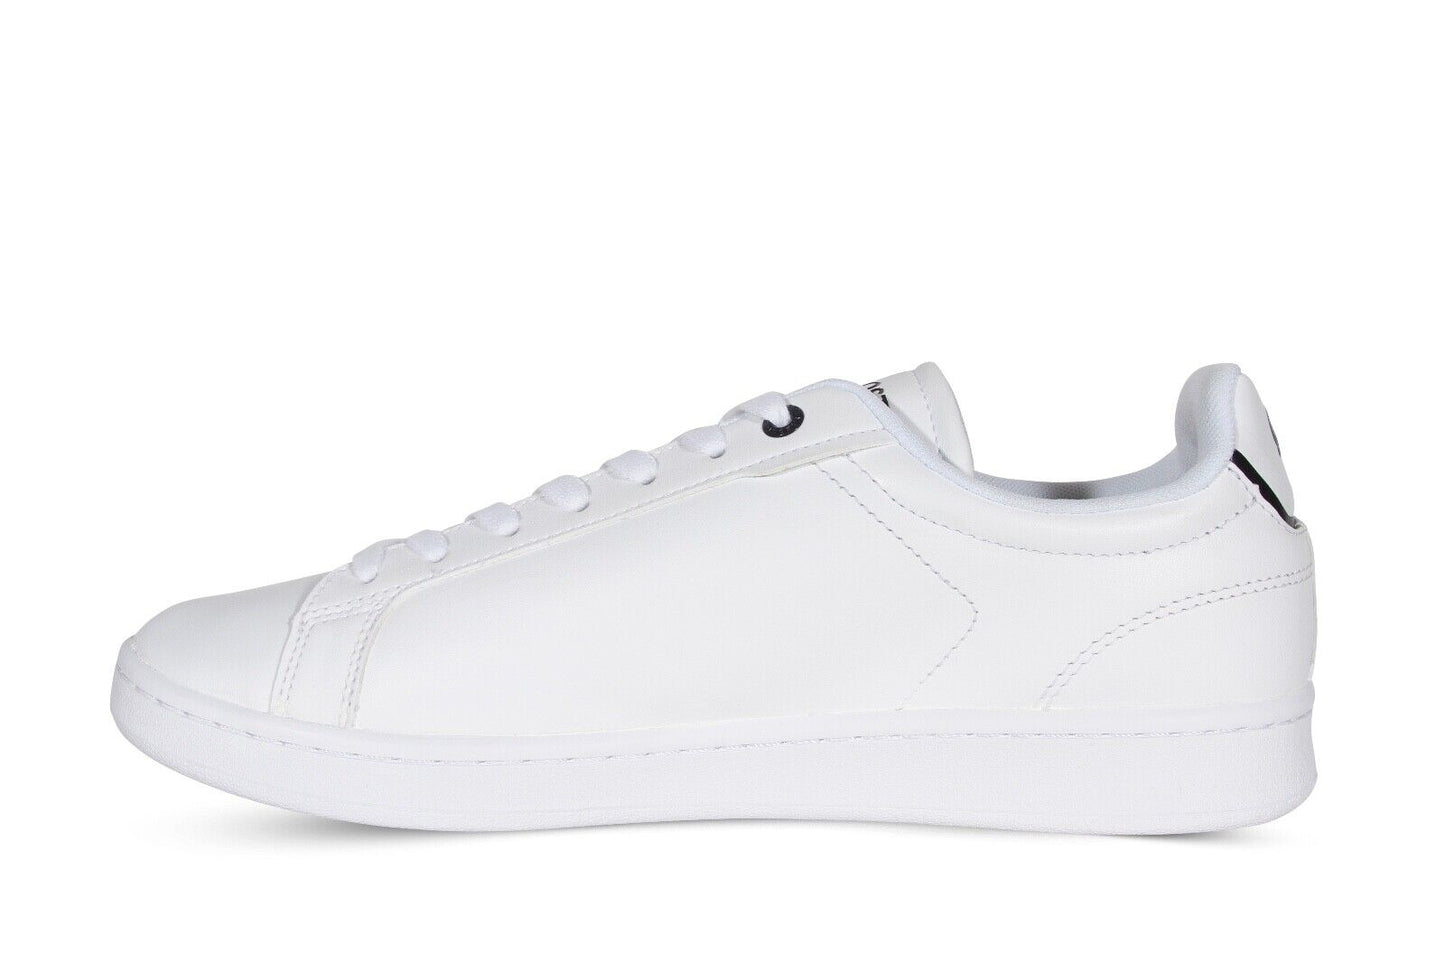 Lacoste Carnaby Pro BL23 1 SMA Men’s Sneakers in White 745SMA0110042